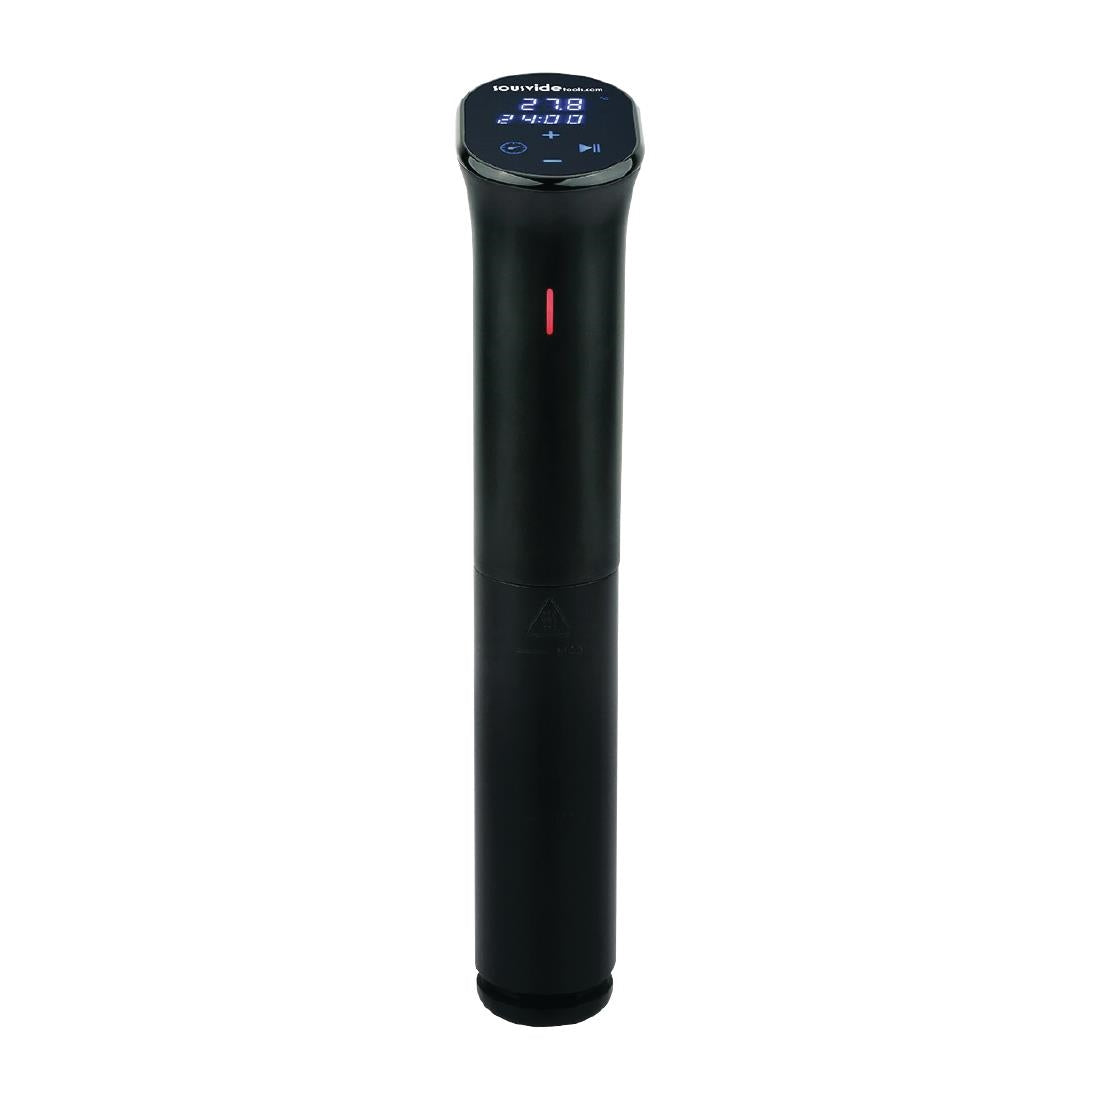 DH762 SousVideTools iVide 2 Sous Vide Cooker with WIFI JD Catering Equipment Solutions Ltd